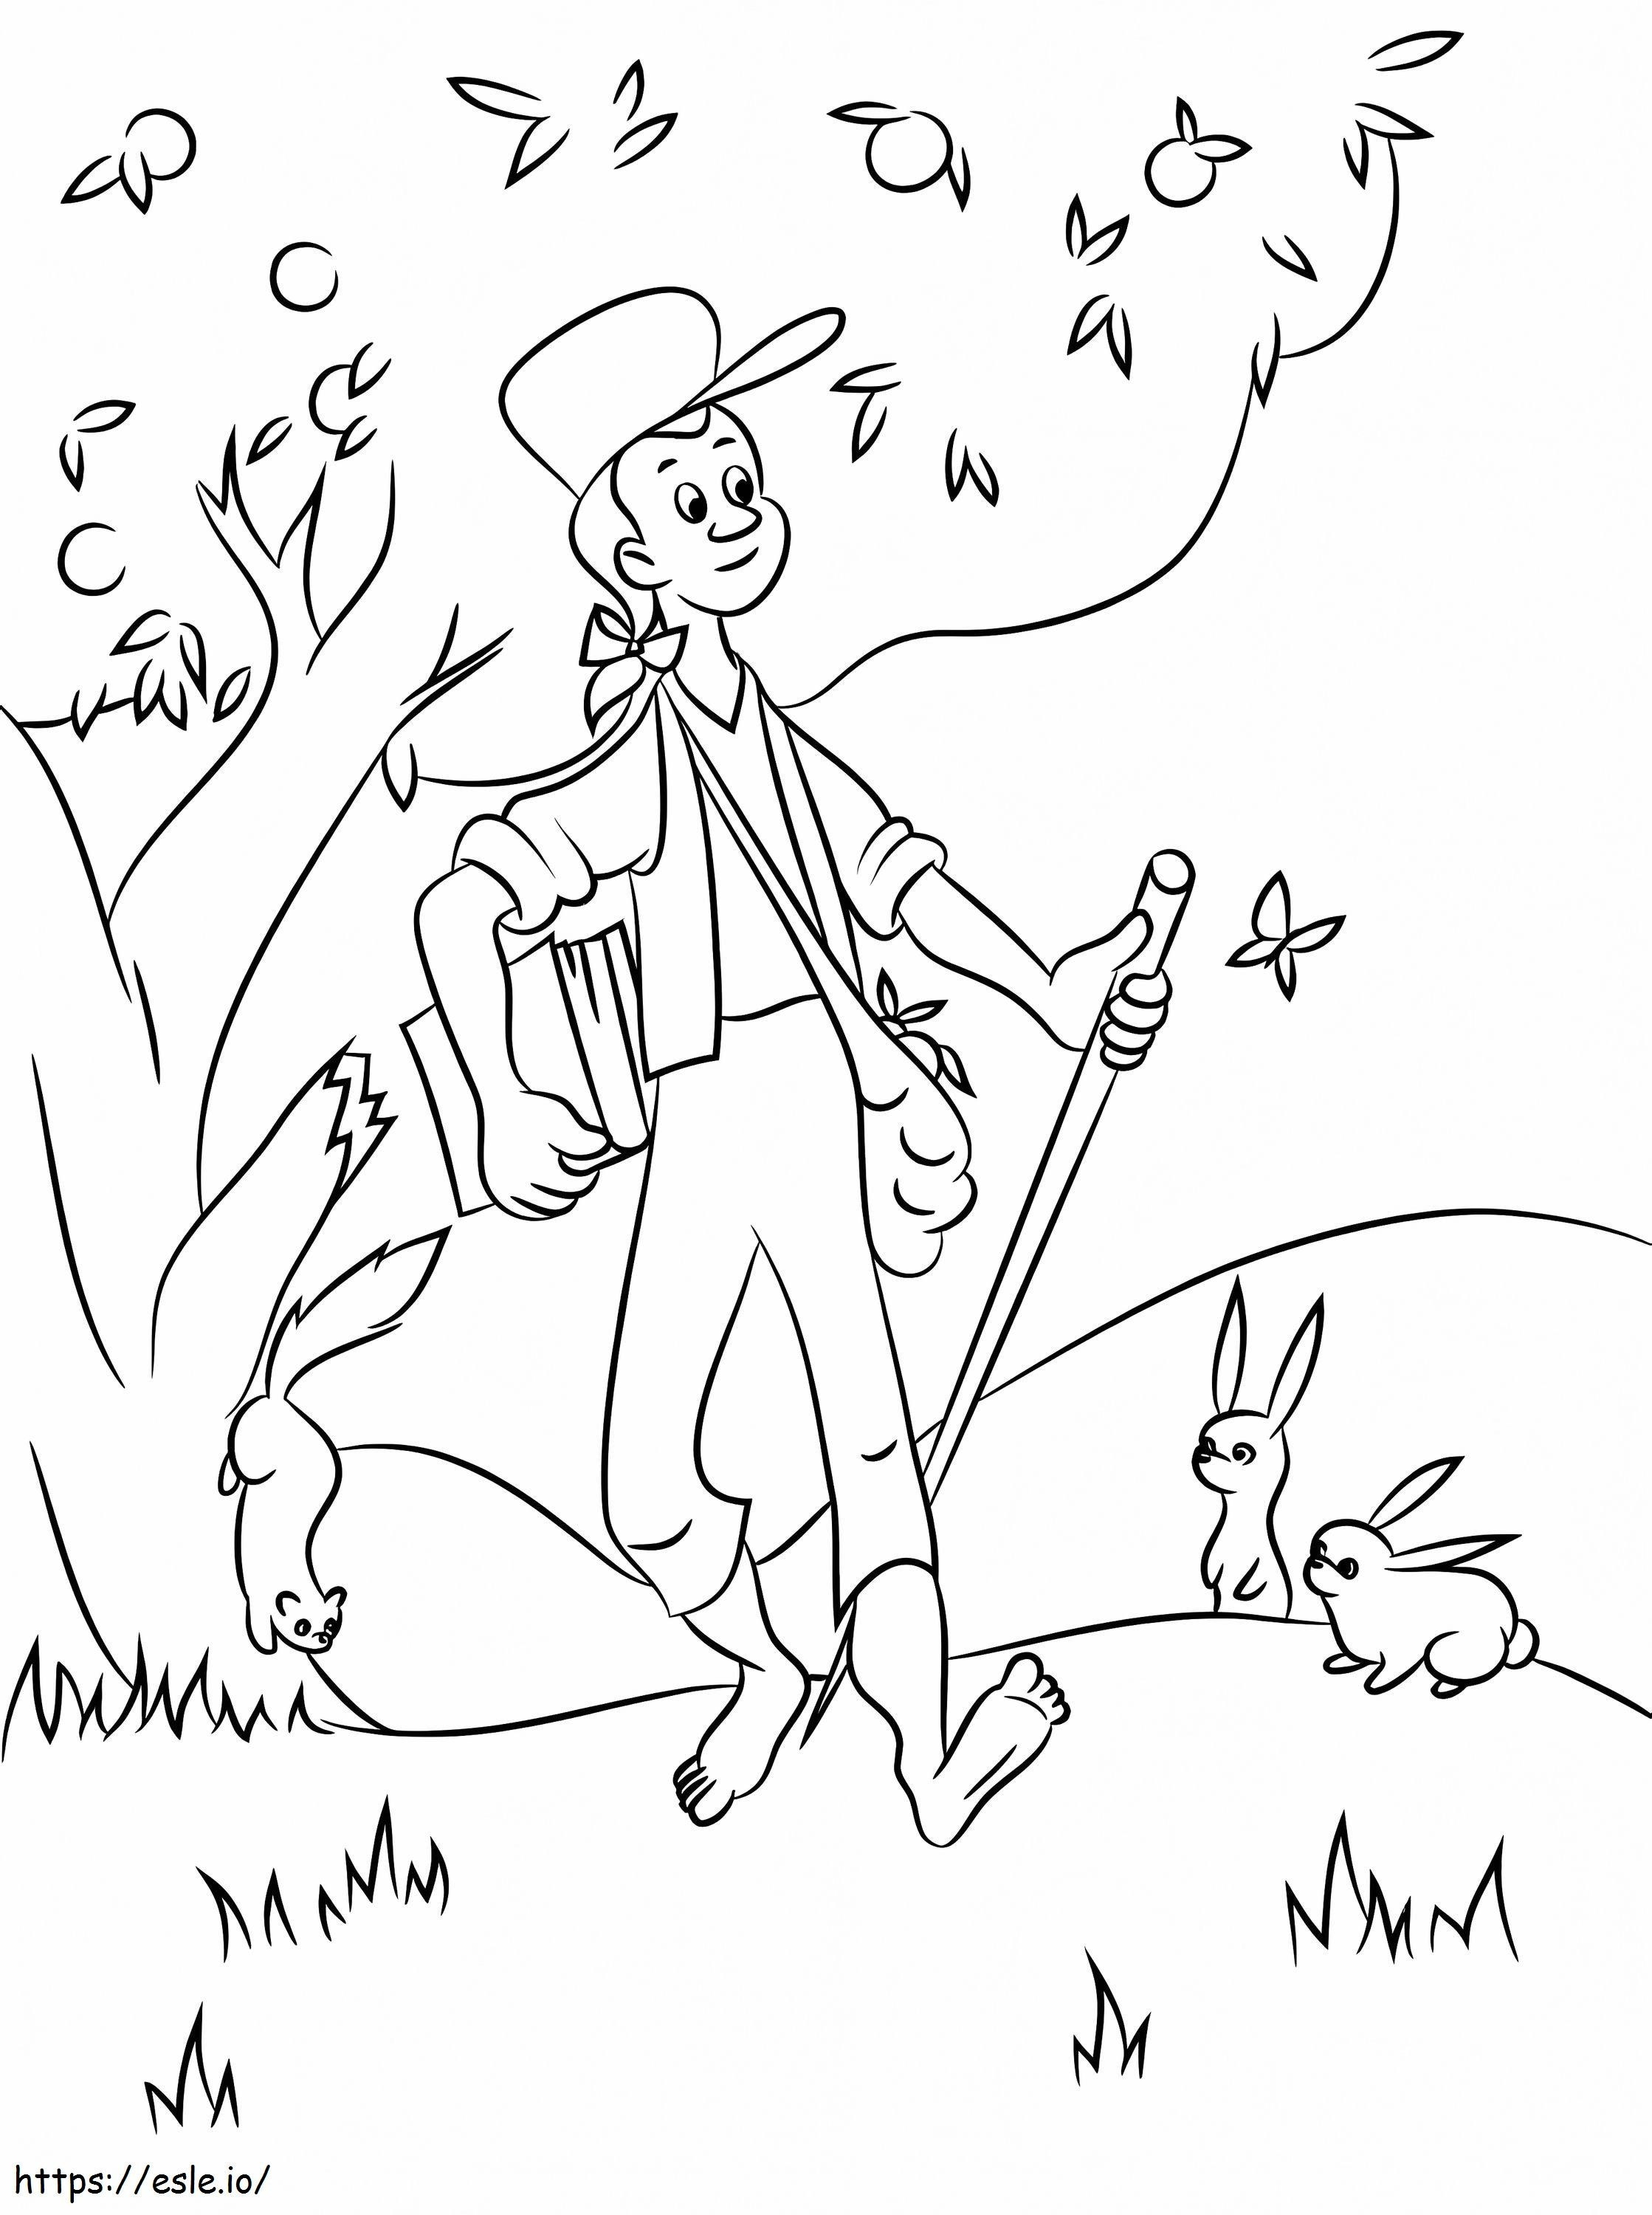 Johnny Appleseed imprimible para colorear